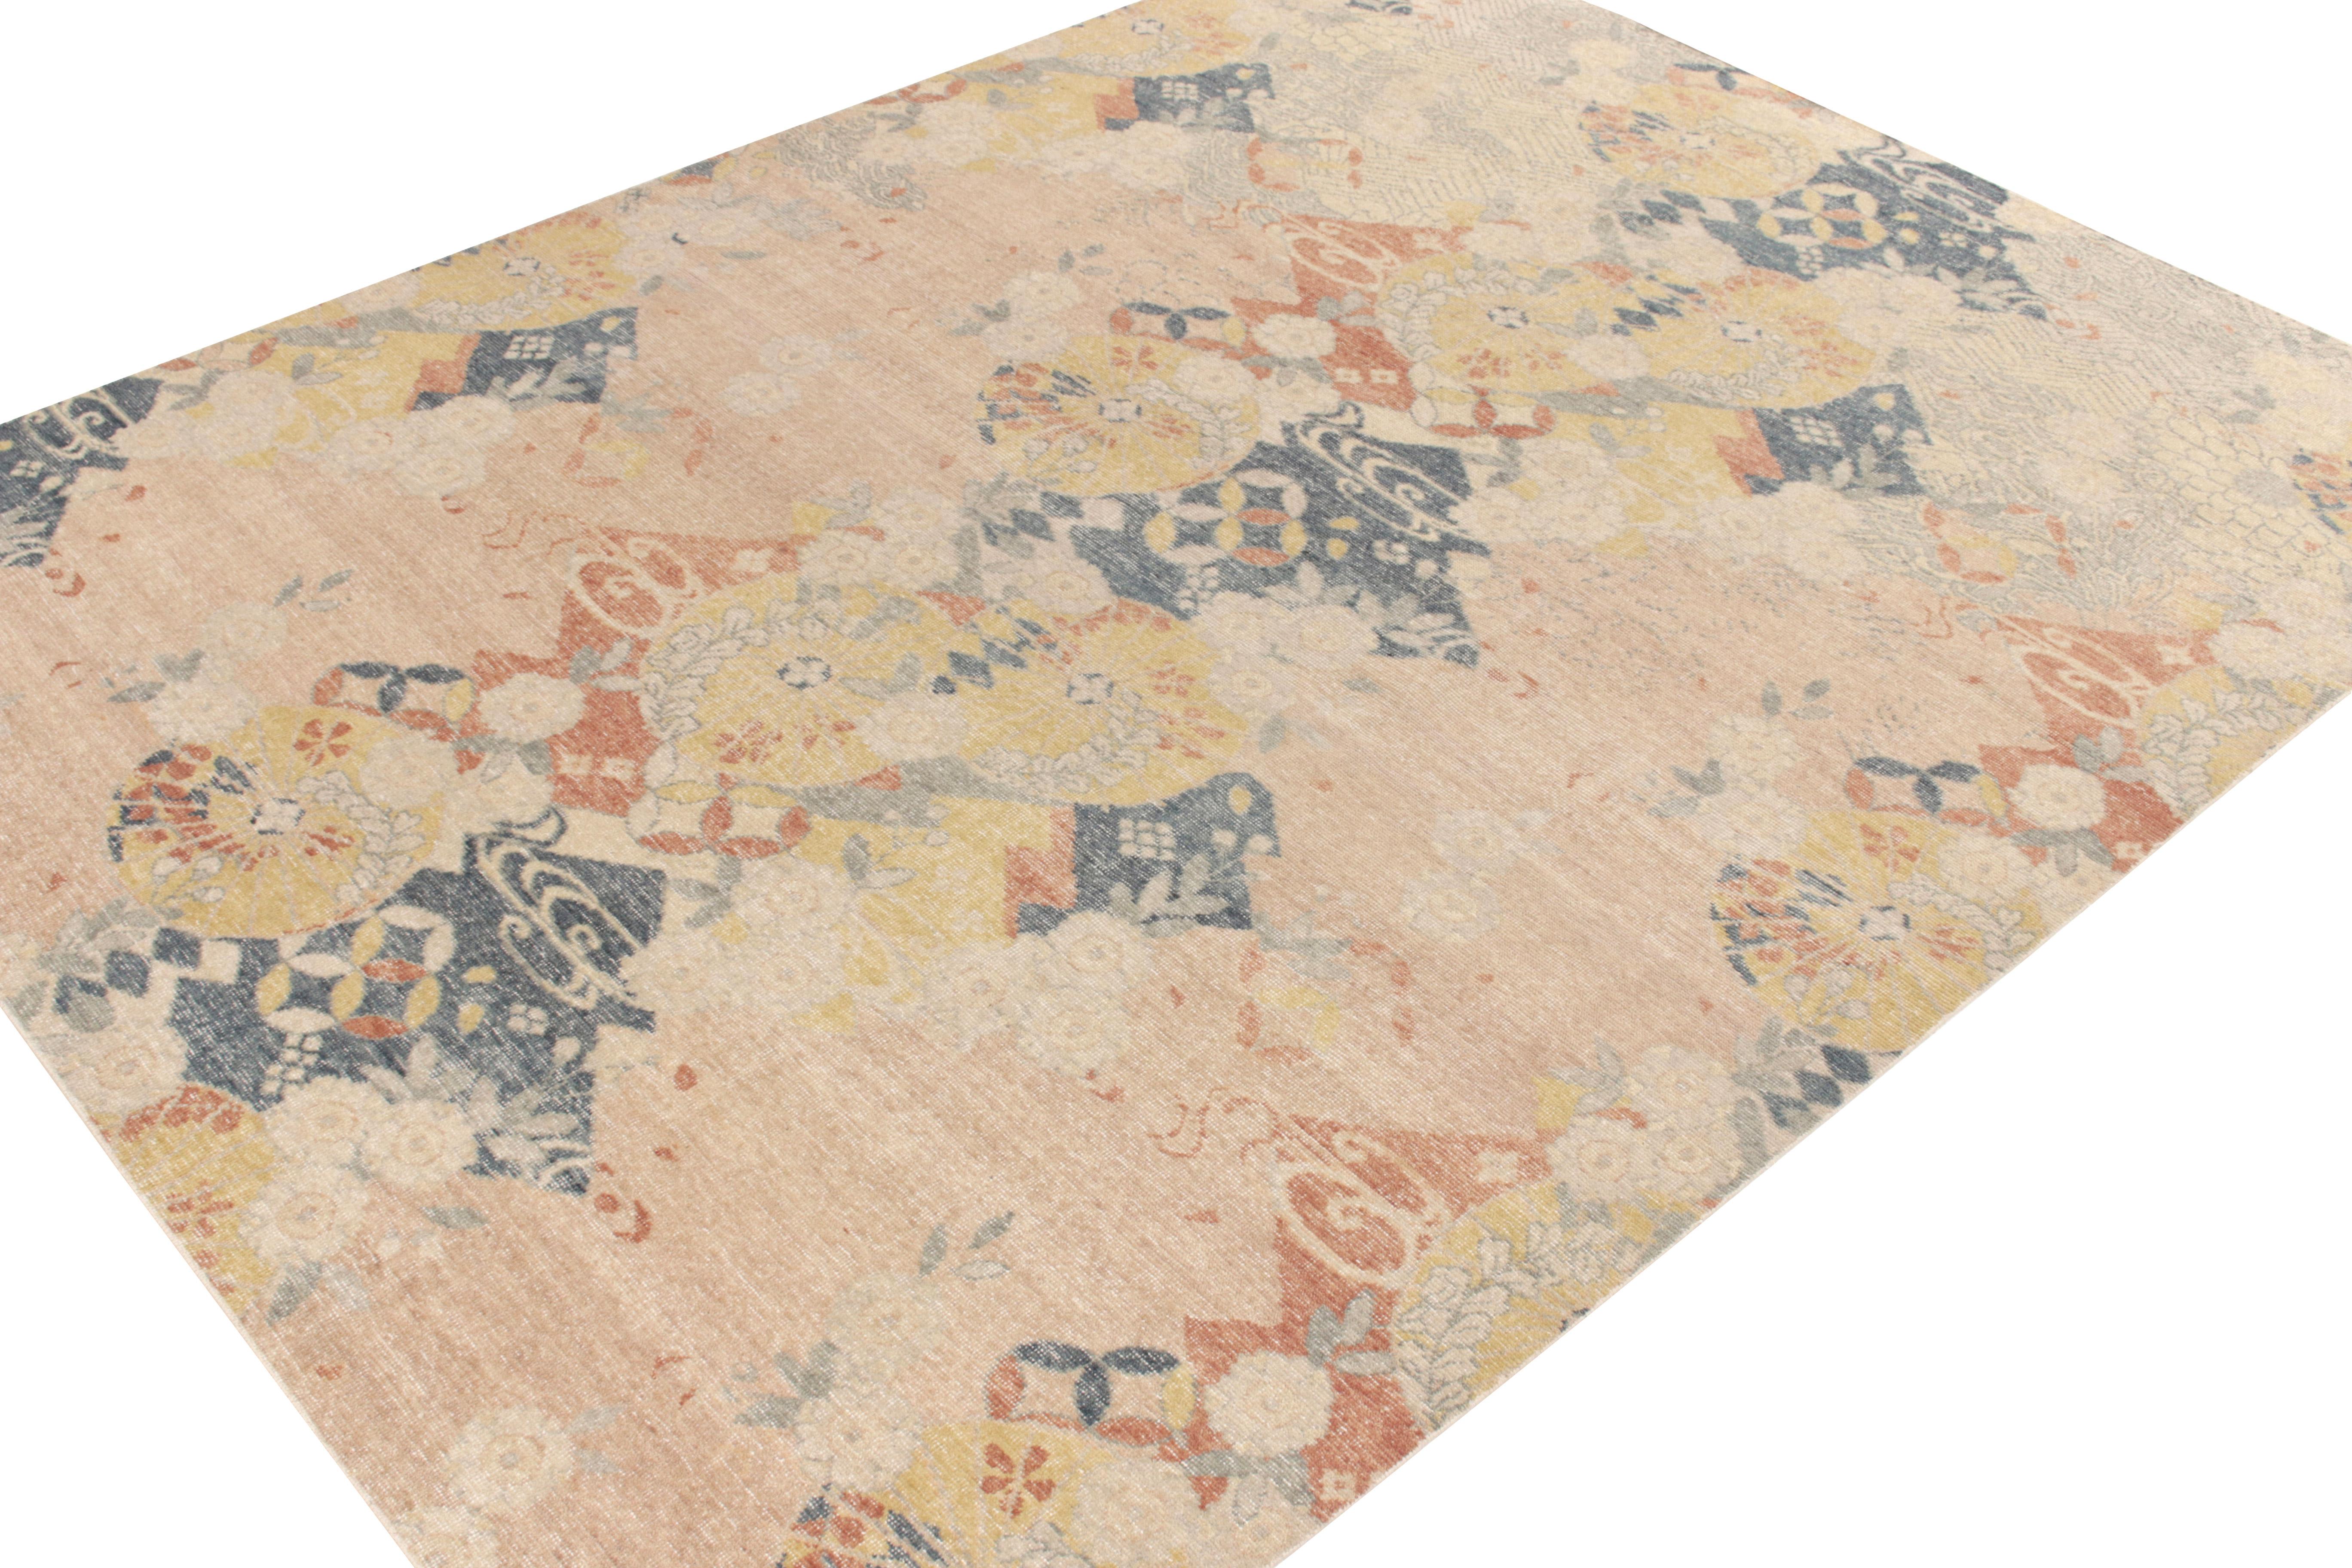 Rug & Kilim's Distressed Japanese Deco Style Teppich in Blau, Rosa All over Muster (Art déco) im Angebot